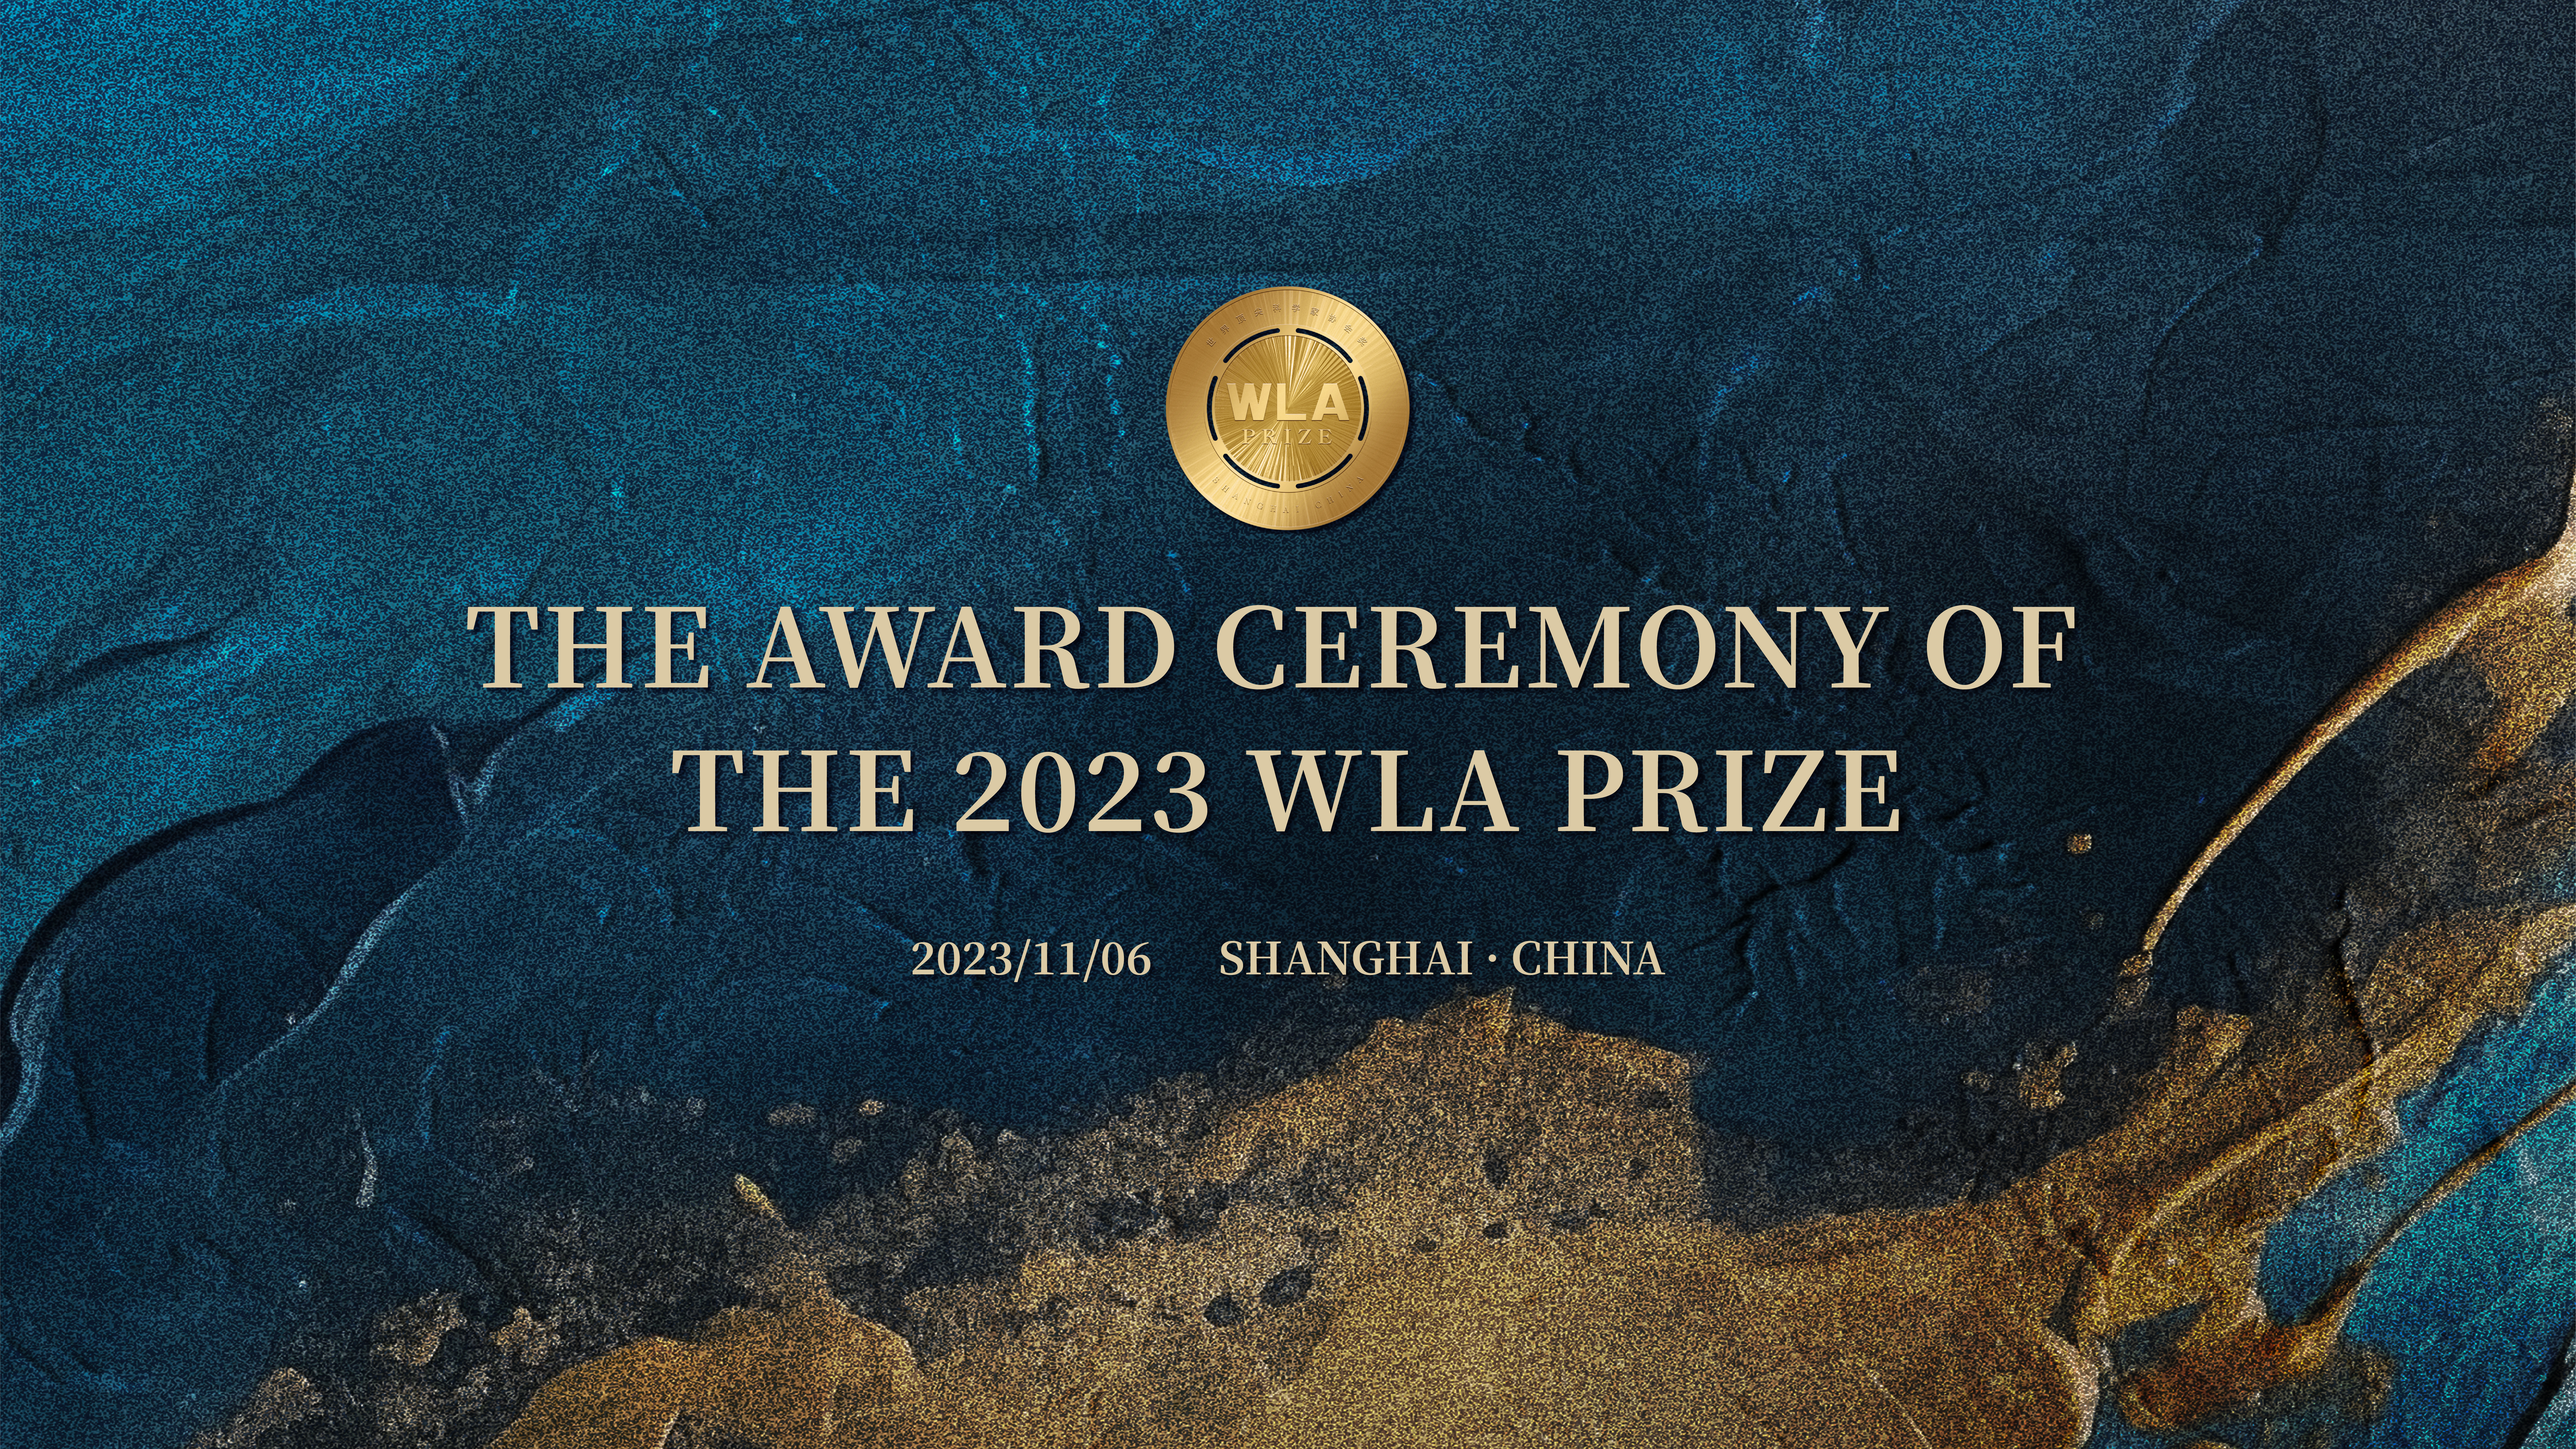 The 2023 WLA Prize Ceremony will be held in Shanghai on Nov. 6